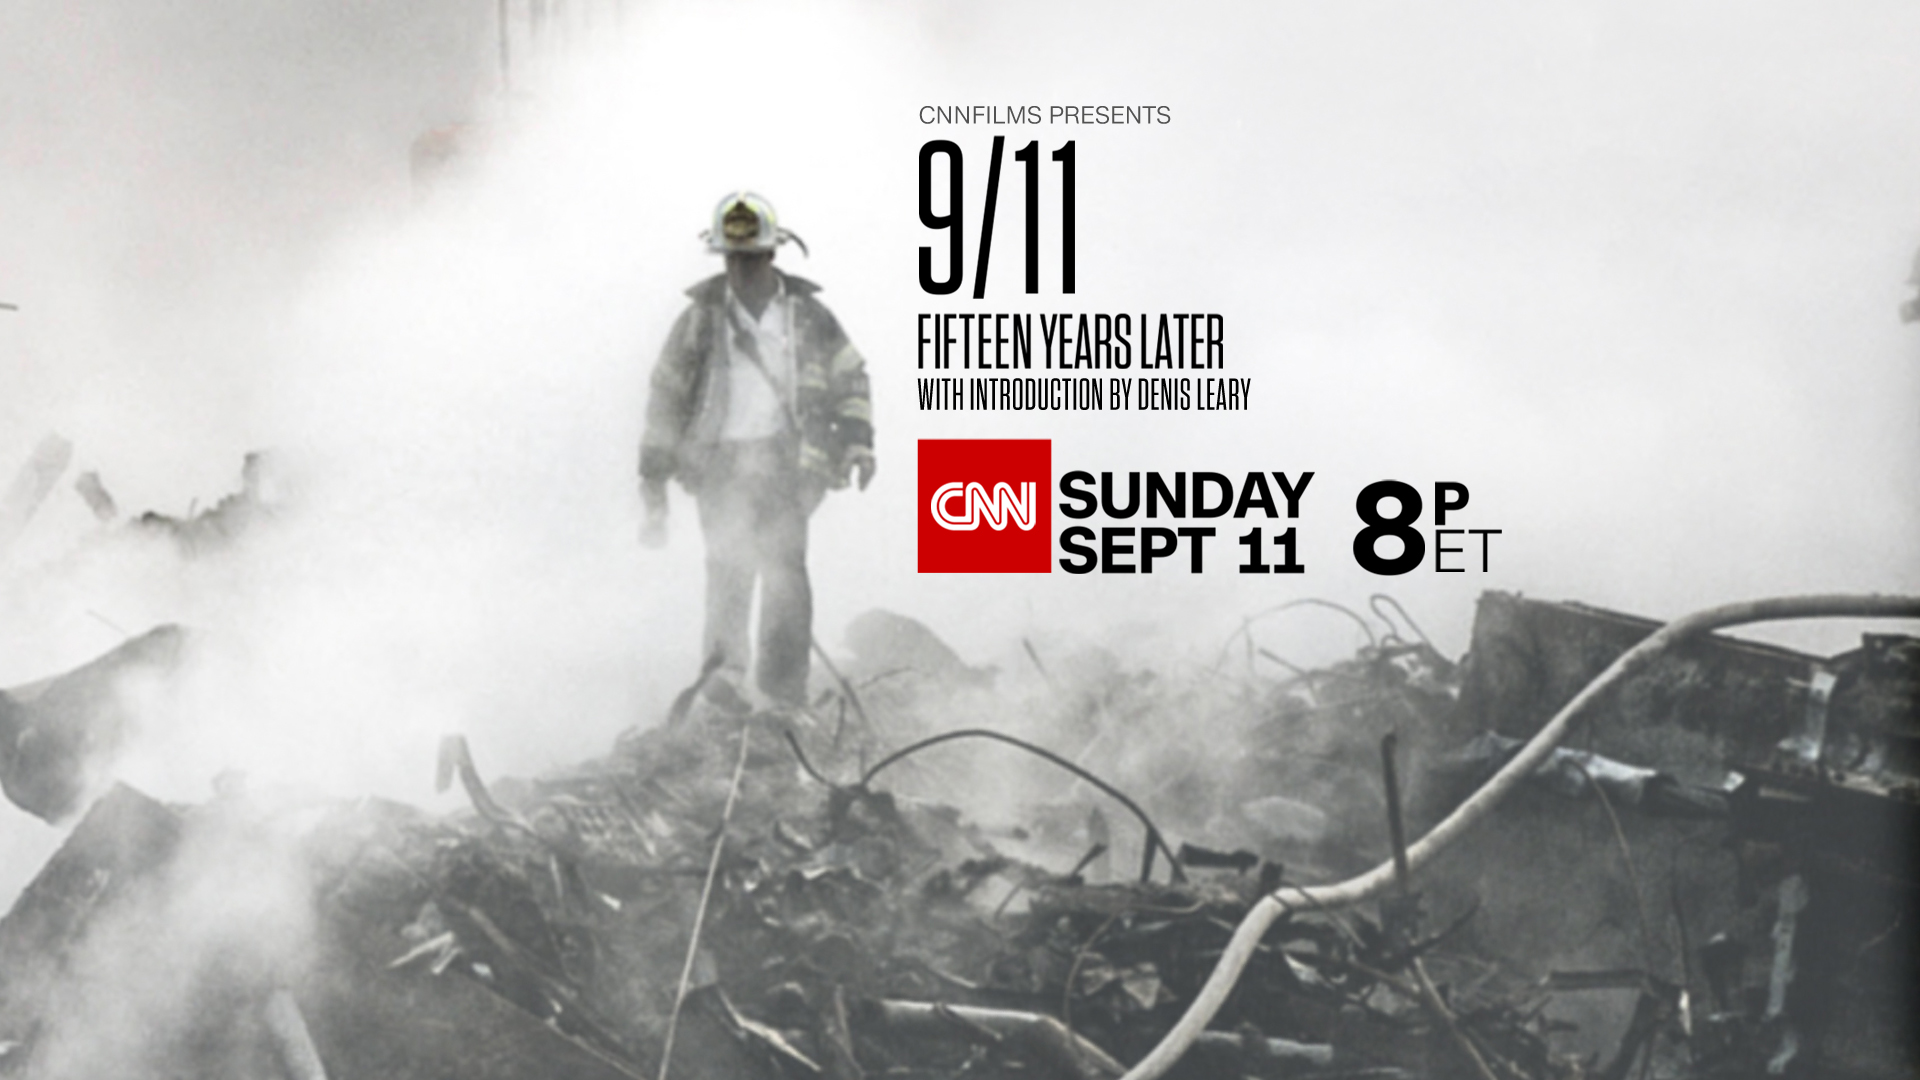 Cnn Films Acquires Co Produces Award Winning ‘911 Film Ahead Of 15